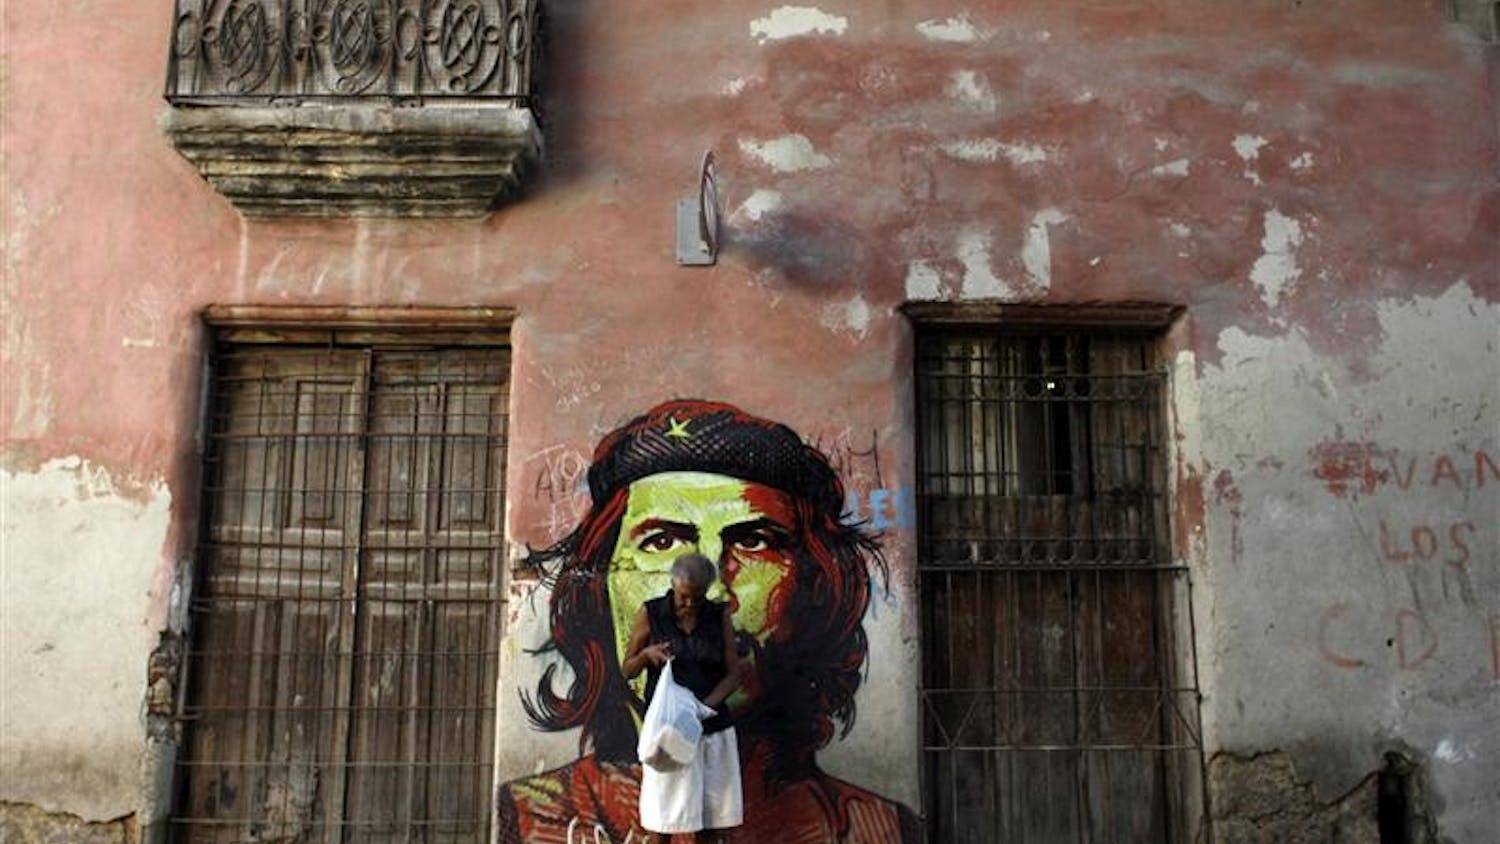 REVOLUTION – A woman walks past a graffiti depicting Argentine-born revolutionary hero Ernesto “Che” Guevara on Wednesday in Havana. Cuba marks the 41st anniversary of “Che” Guevara’s death on Oct. 8, although he was killed on Oct. 9, 1967, in the town of La Higuera, Bolivia. 